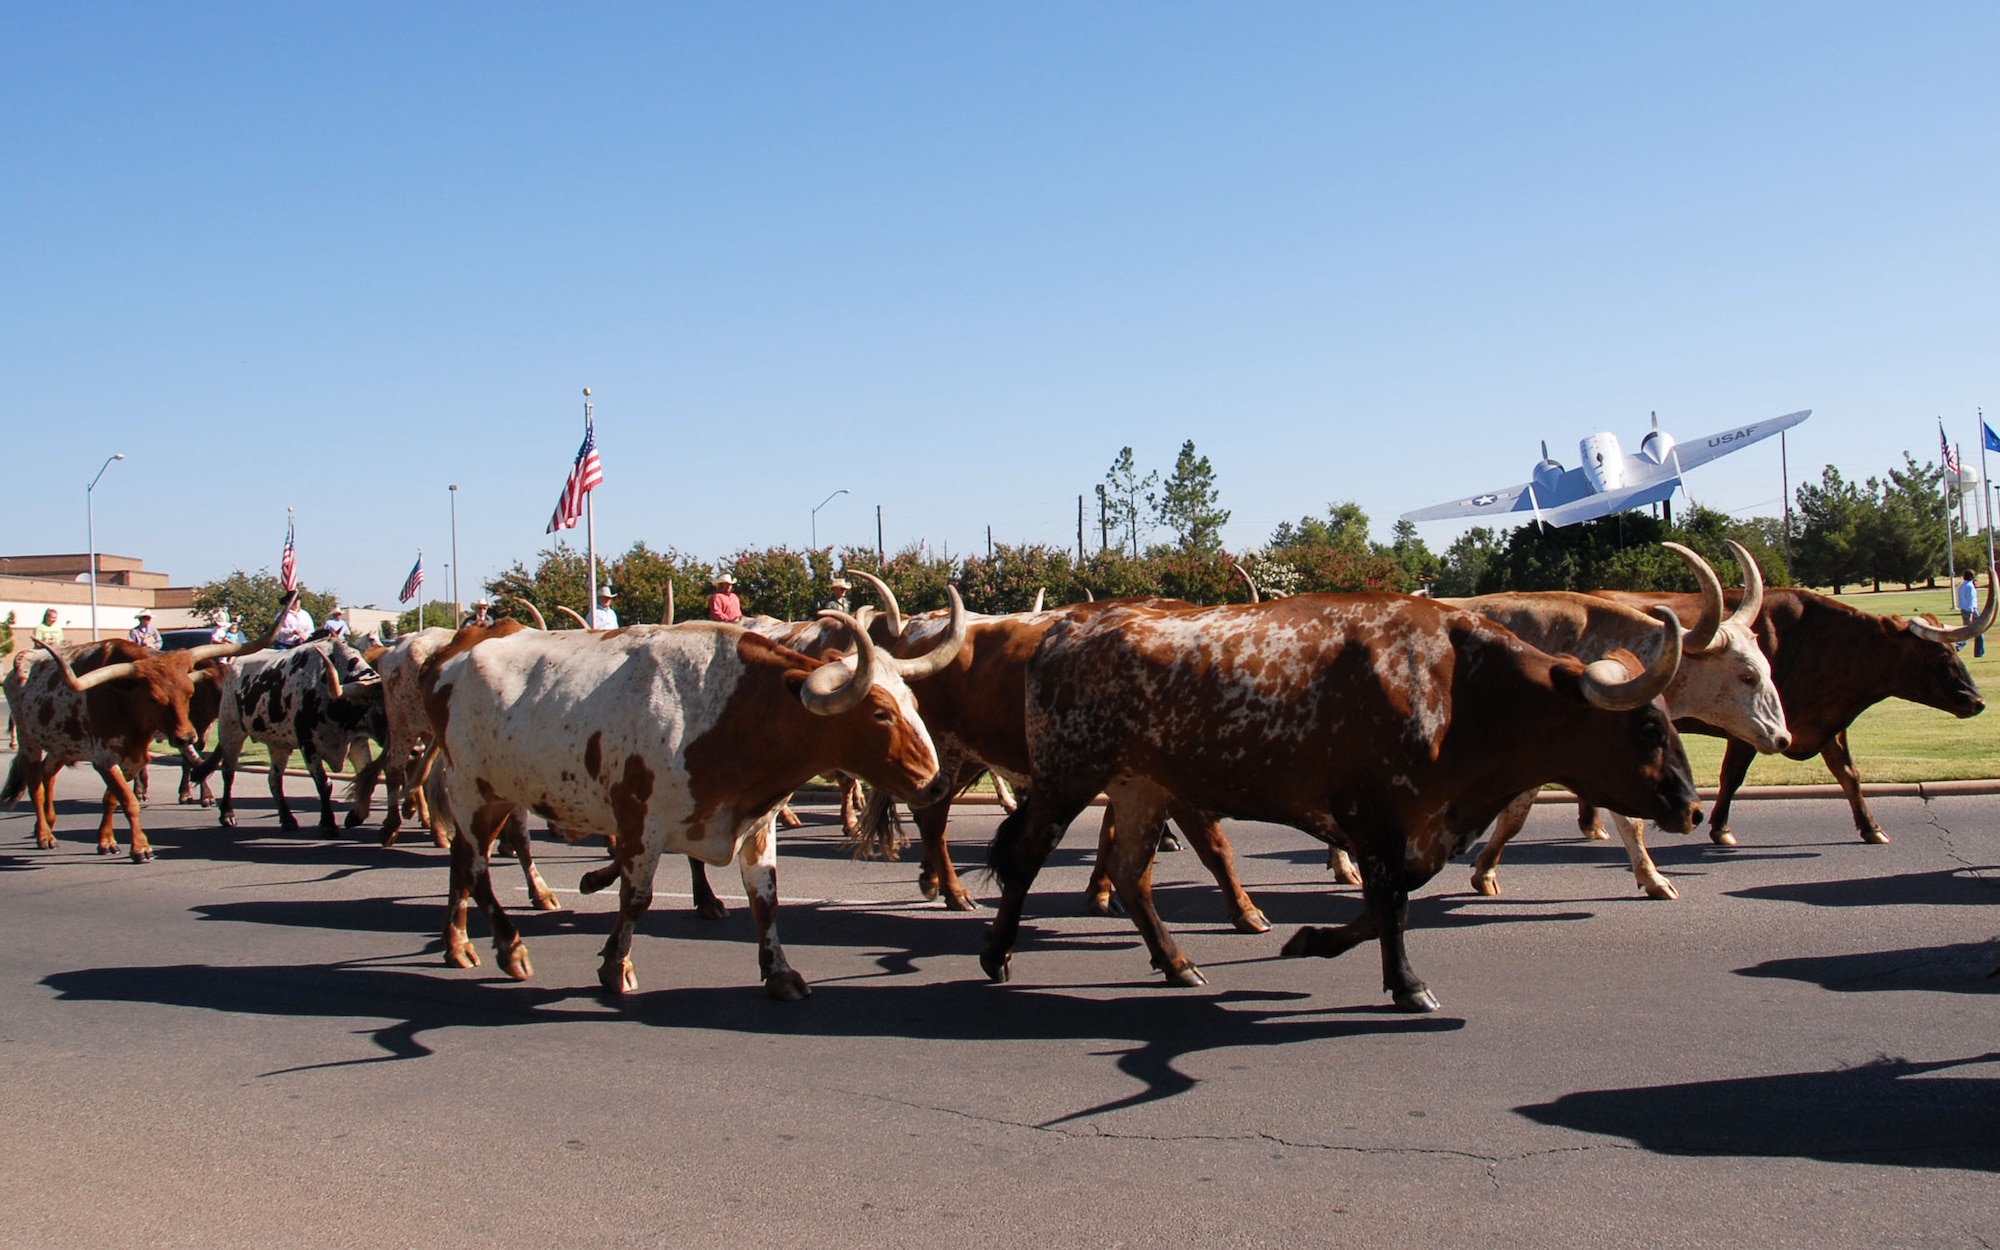 ALTUS AIR FORCE BASE, Okla. –  A herd of longhorn cattle are lead through the streets of Altus Air Force Base by local ranchers and riders during the annual cattle drive August  26. The cattle were driven appoximately 3 and a half miles, going through the main portions of the base and housing. (U.S. Air Force photo by Airman 1st Class Christopher Arnold/Released 97th Air Mobility Wing – Public Affairs)